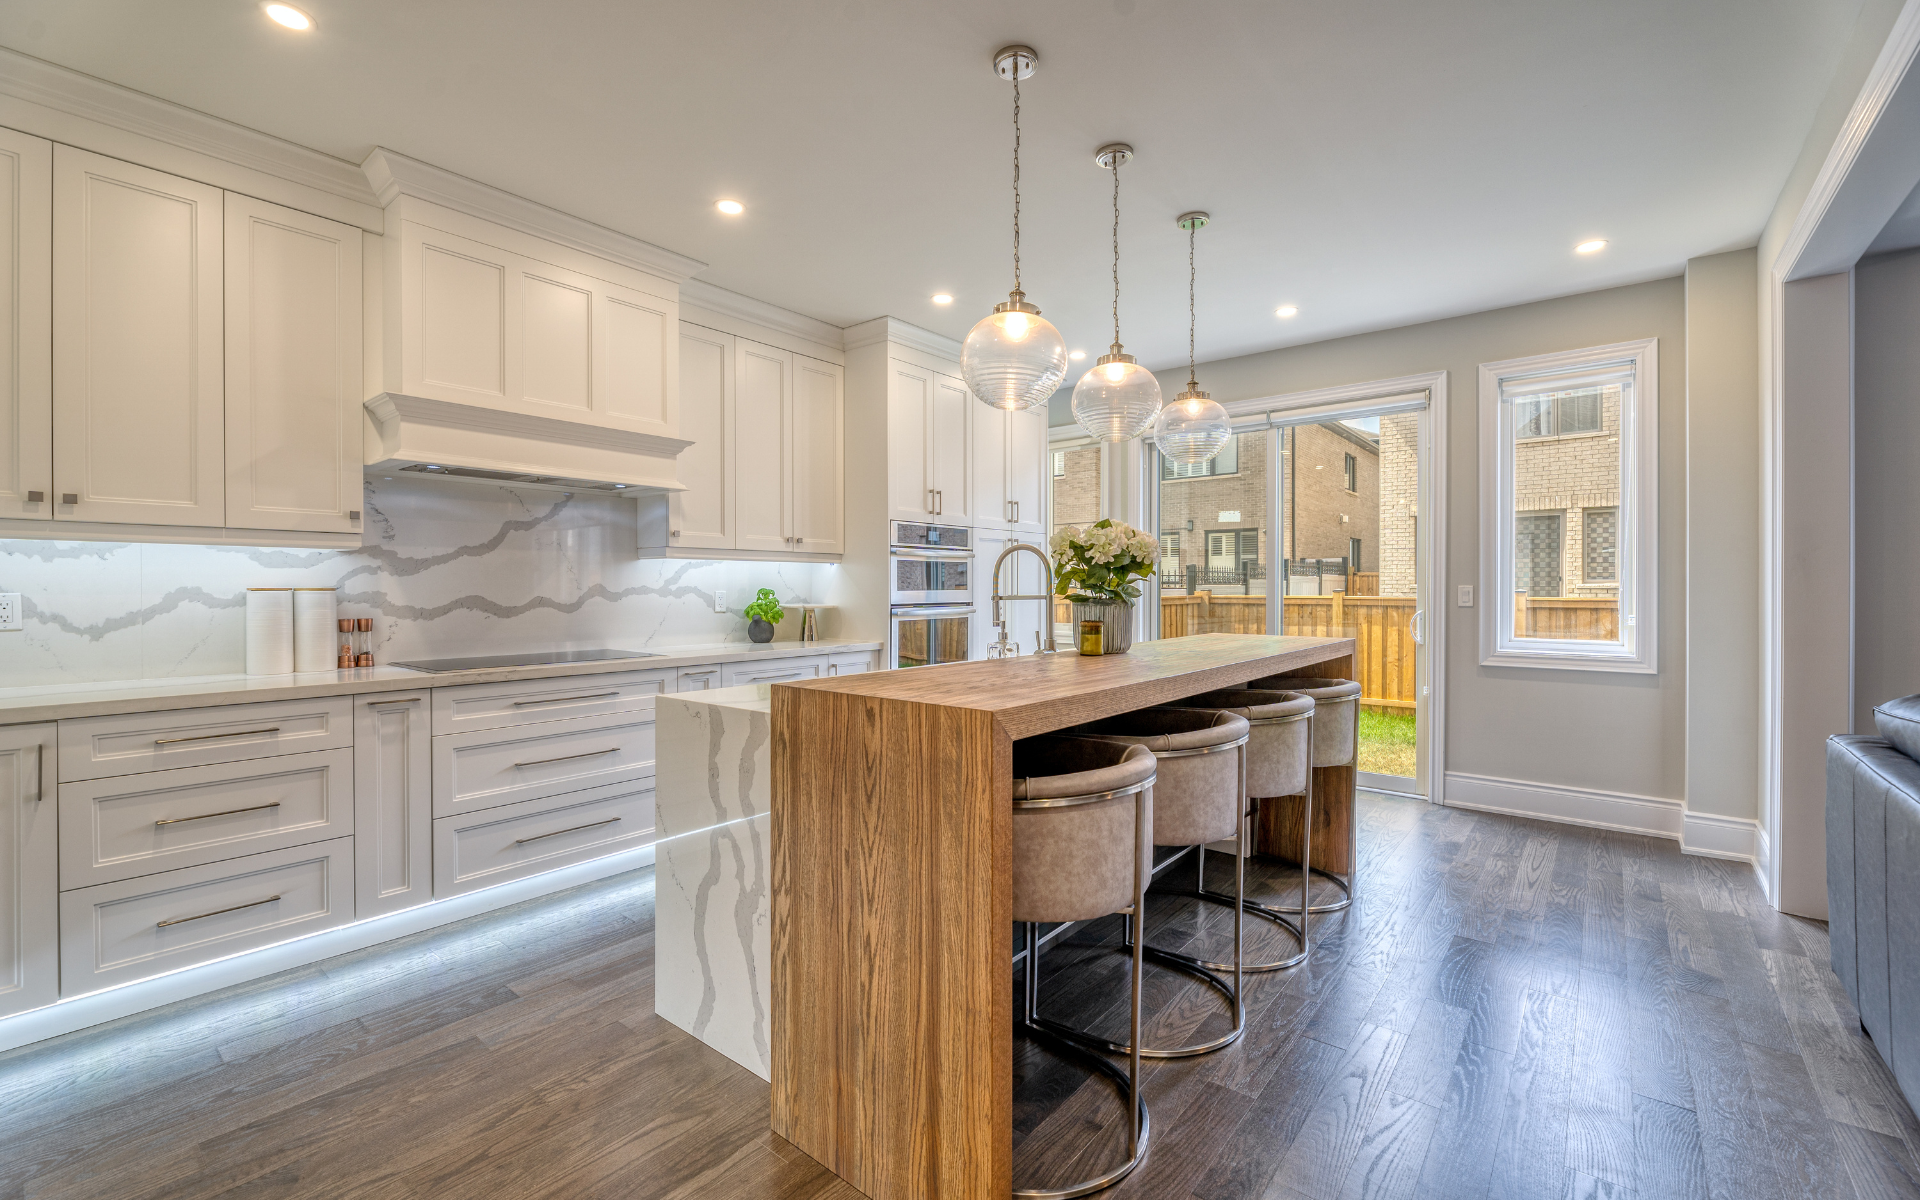 Spacious kitchen style with shaker cabinets